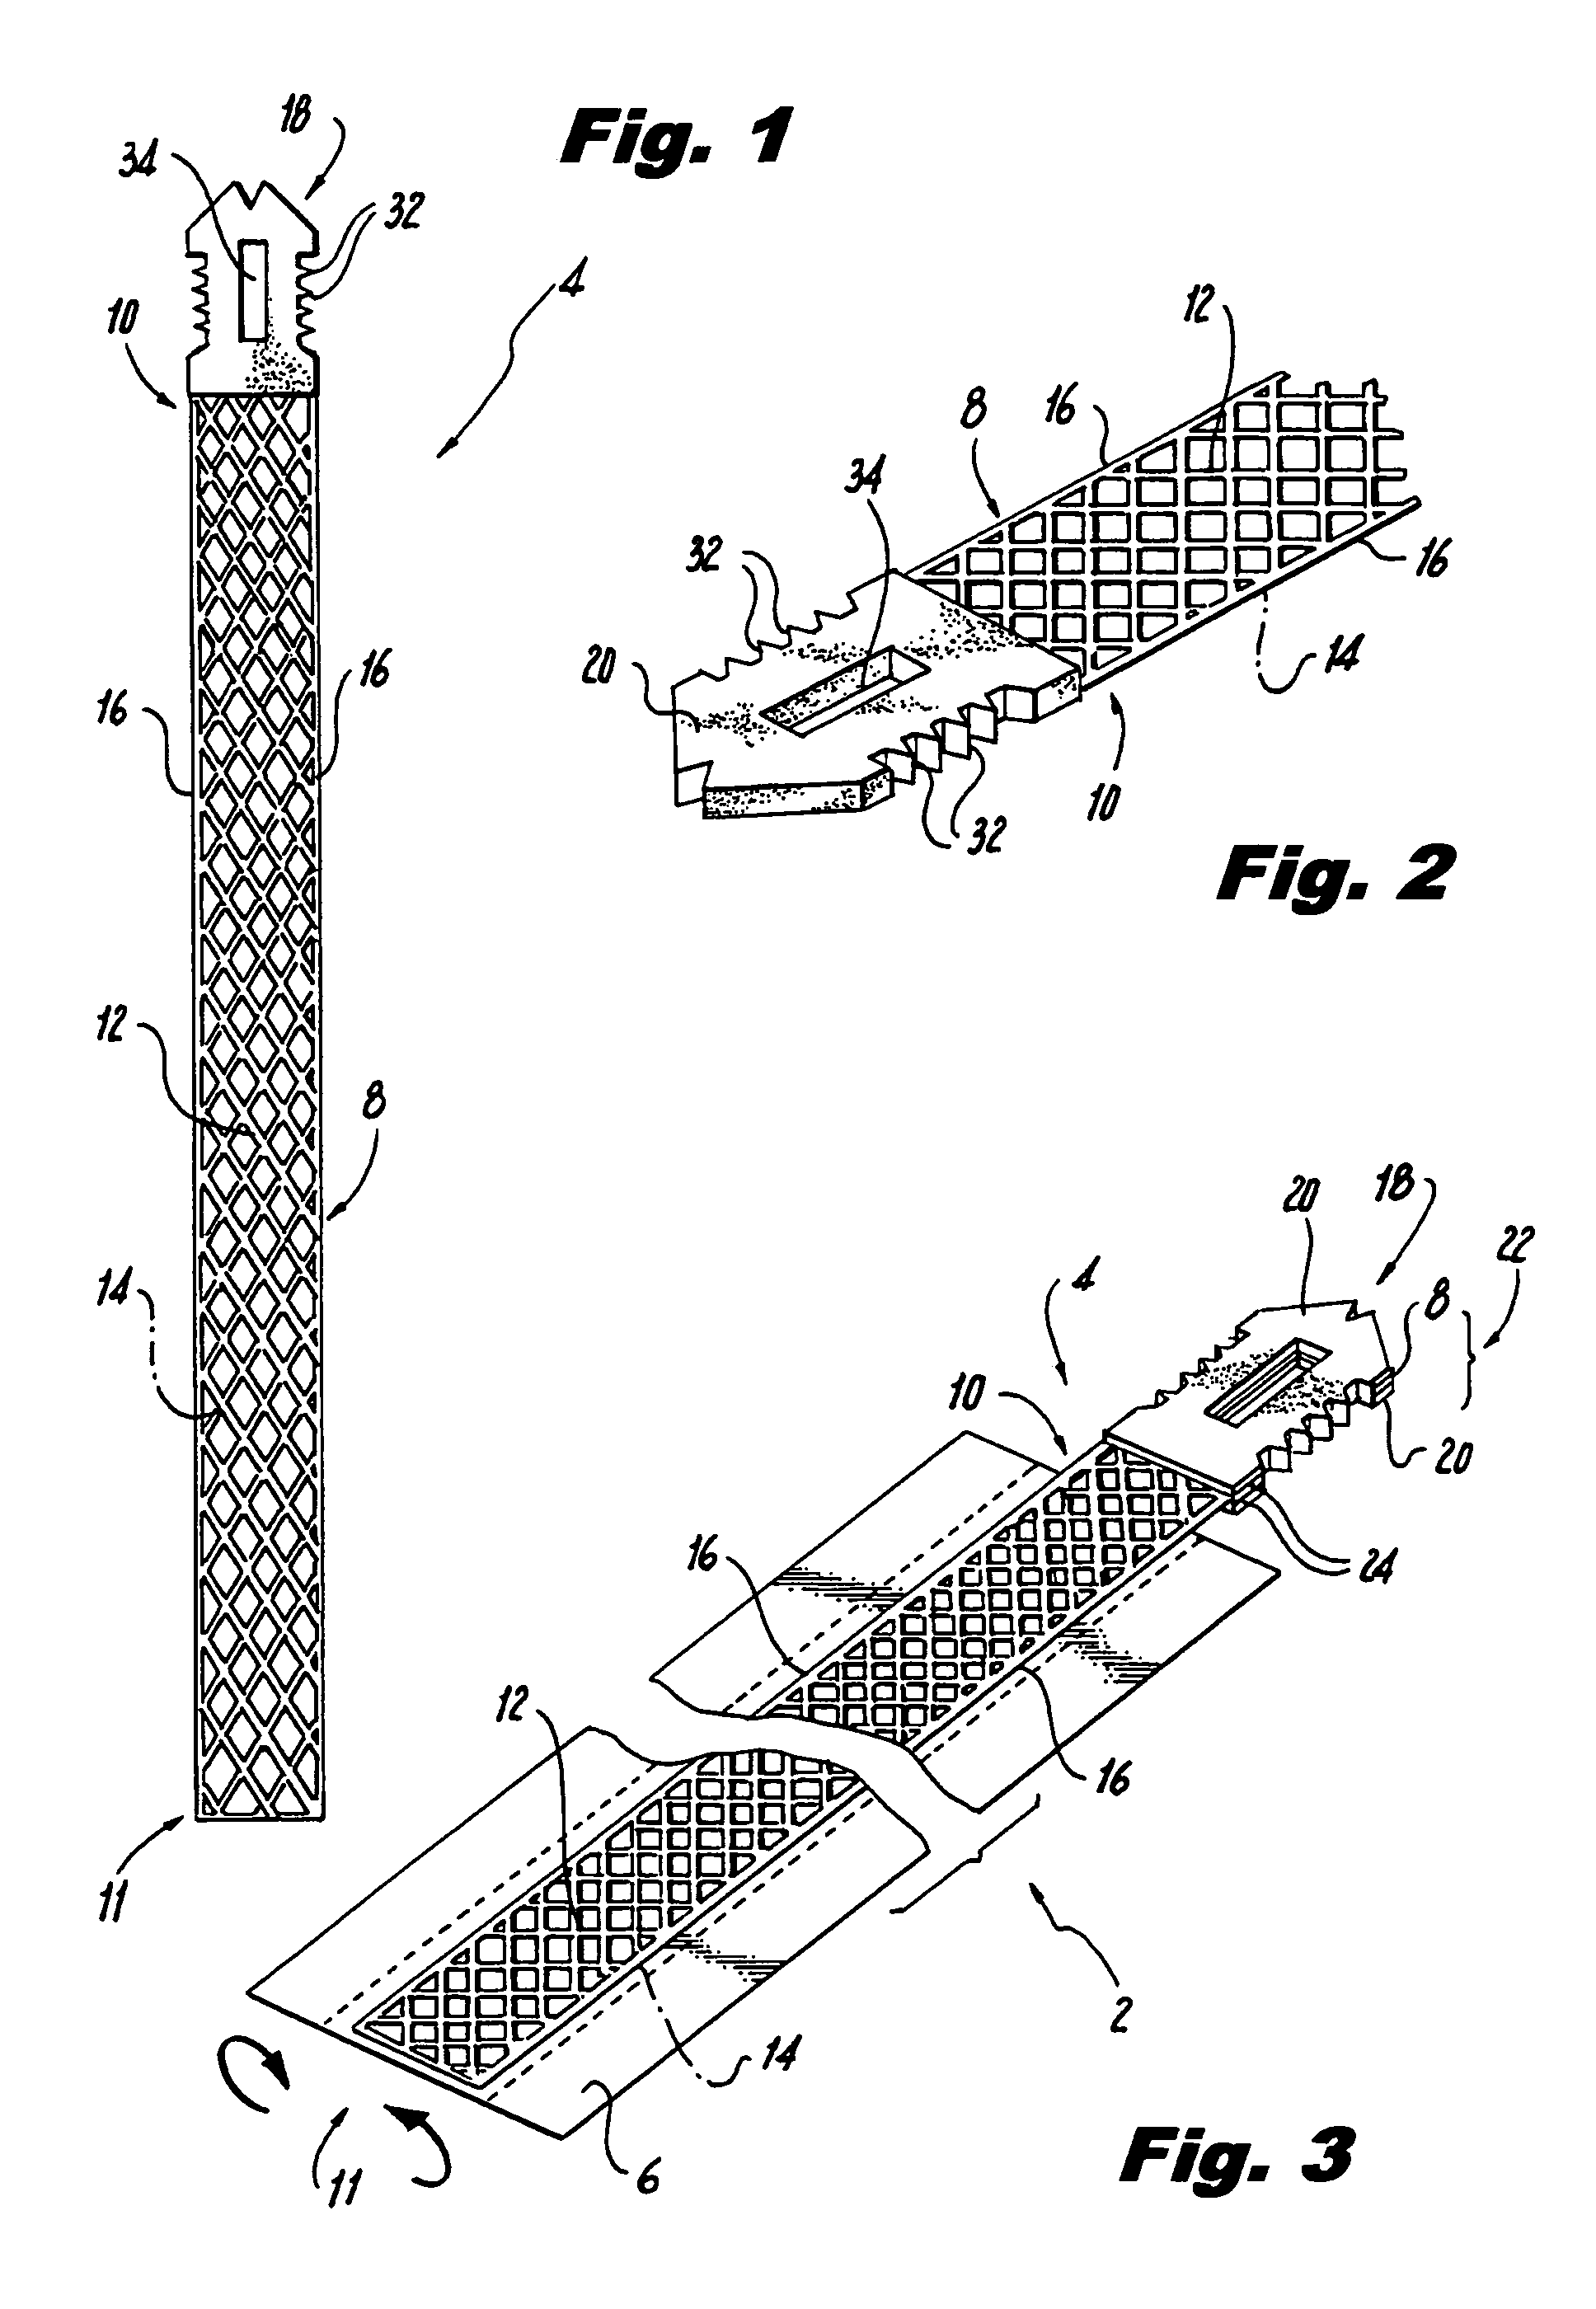 Method of facial reconstructive surgery using a self-anchoring tissue lifting device